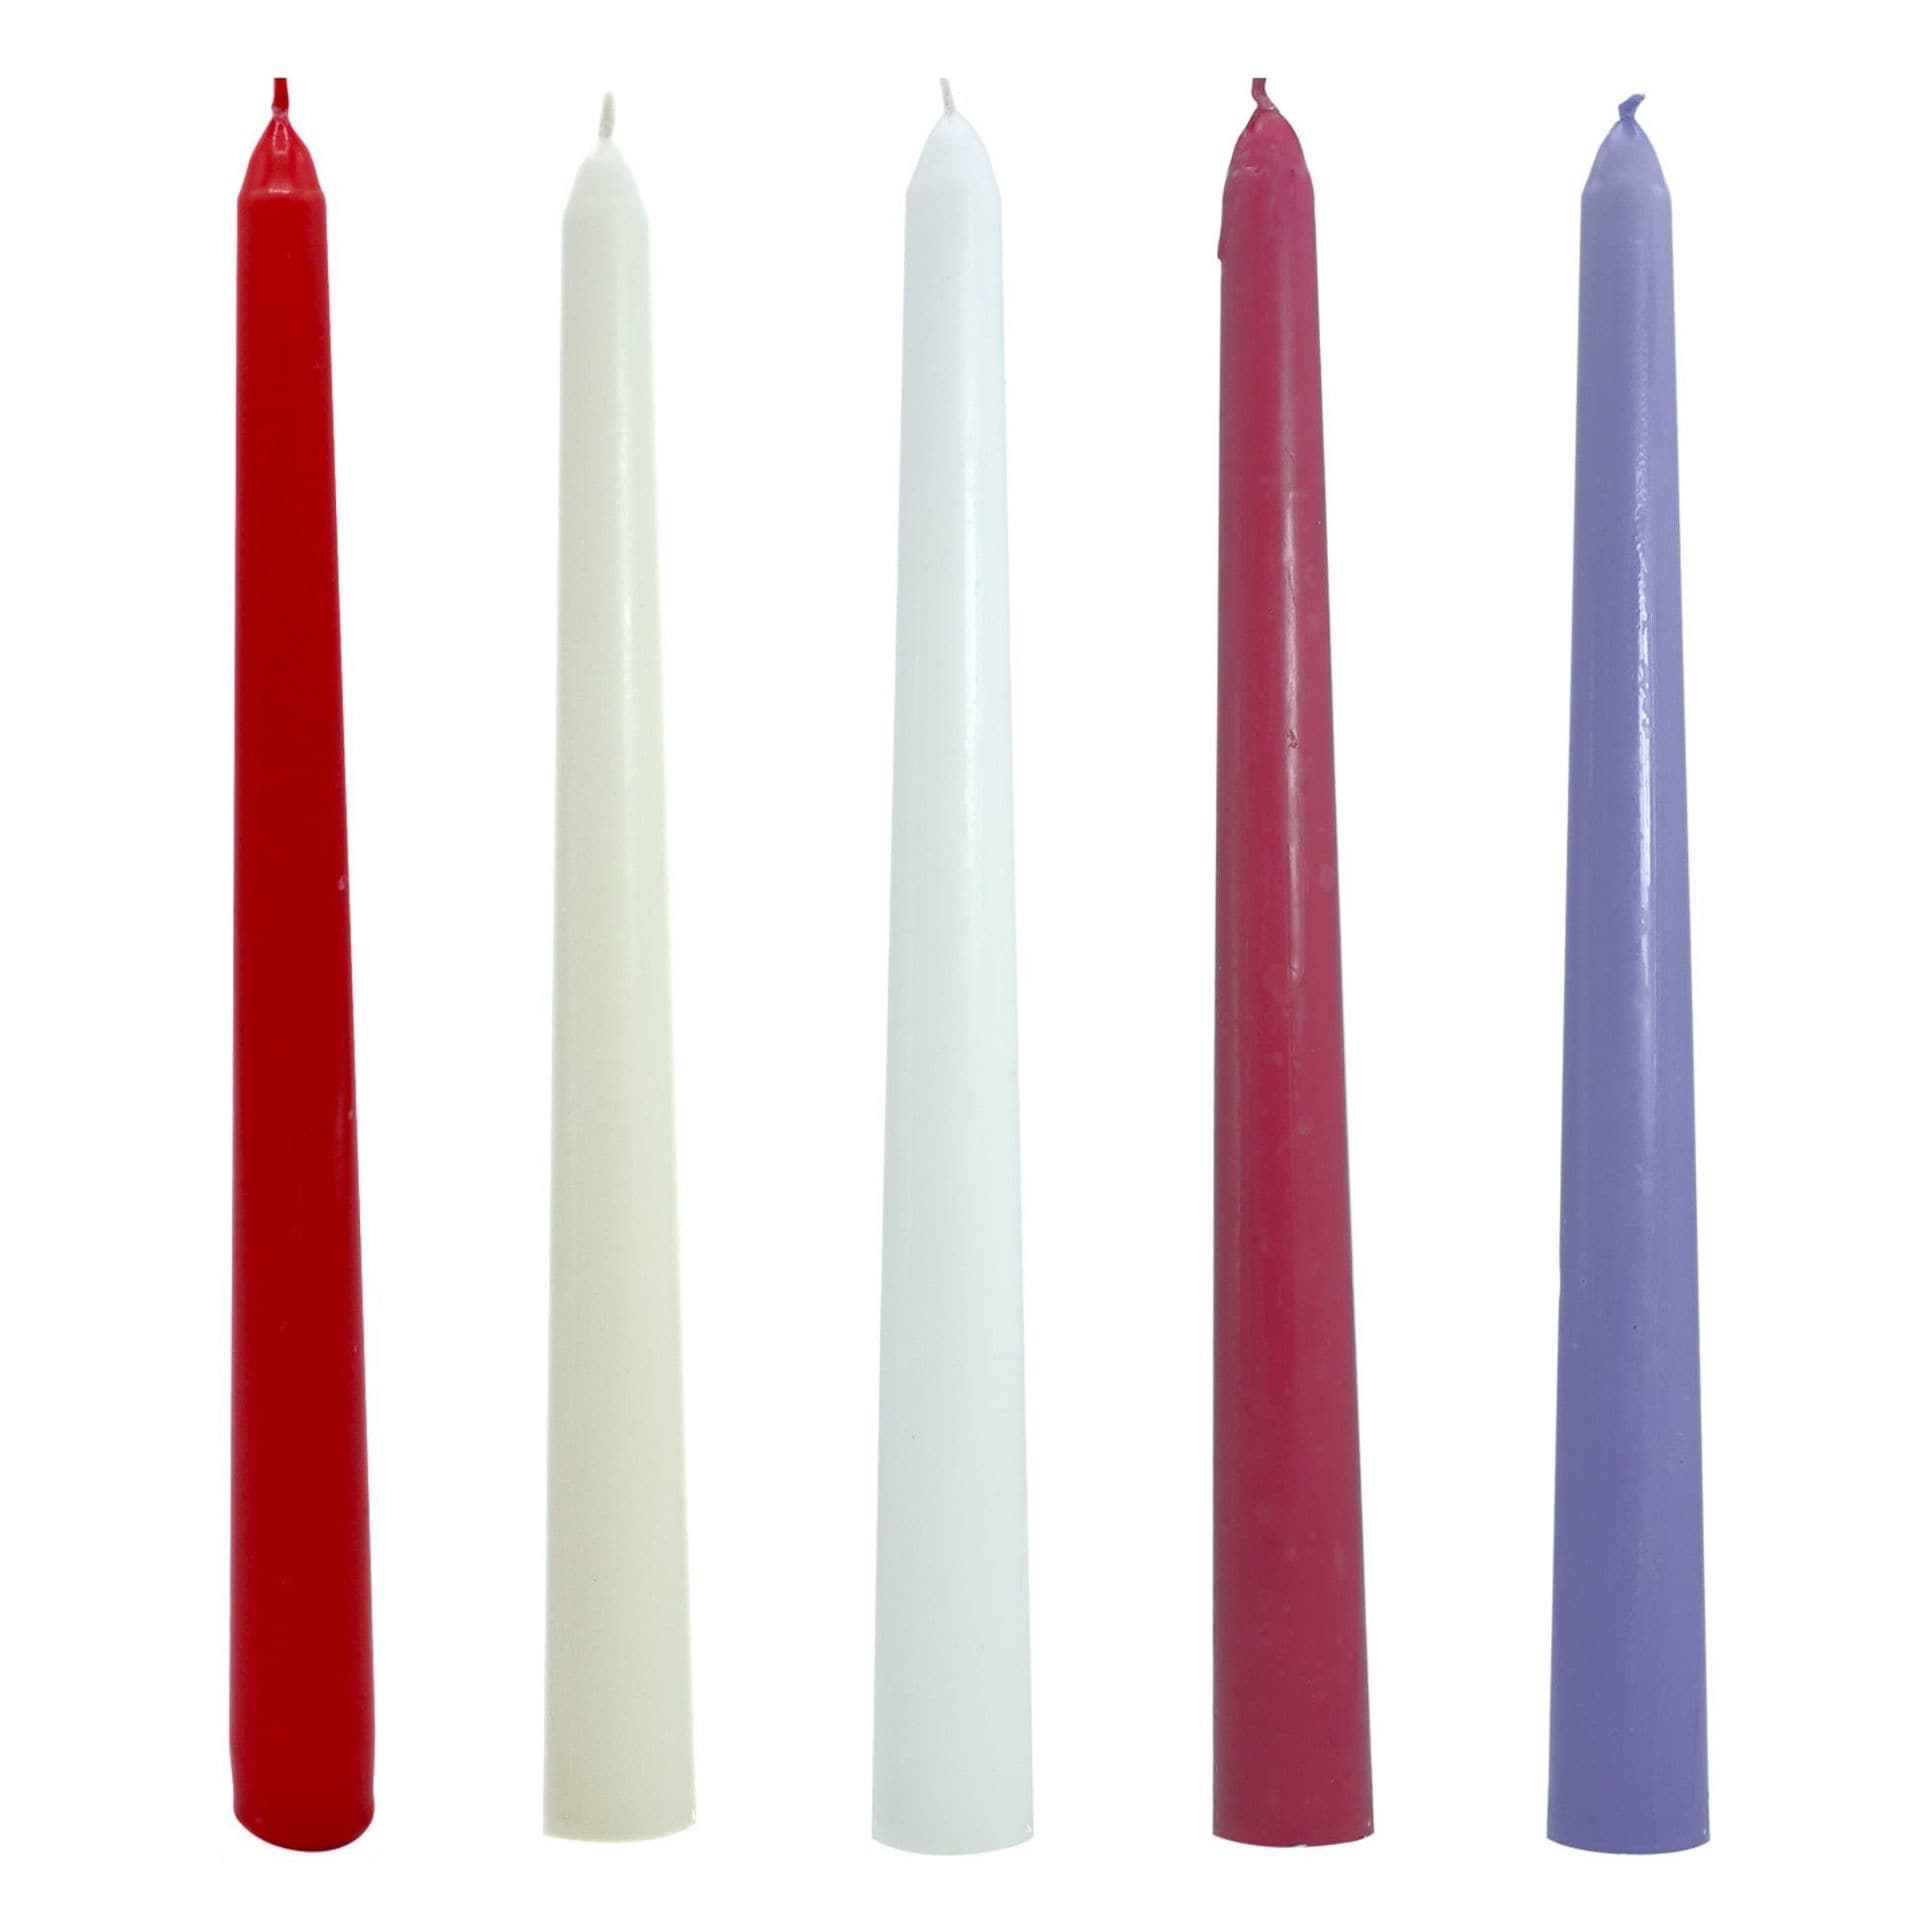 25 Red Unscented Wax Taper Candles, 8 Hour Burn Time